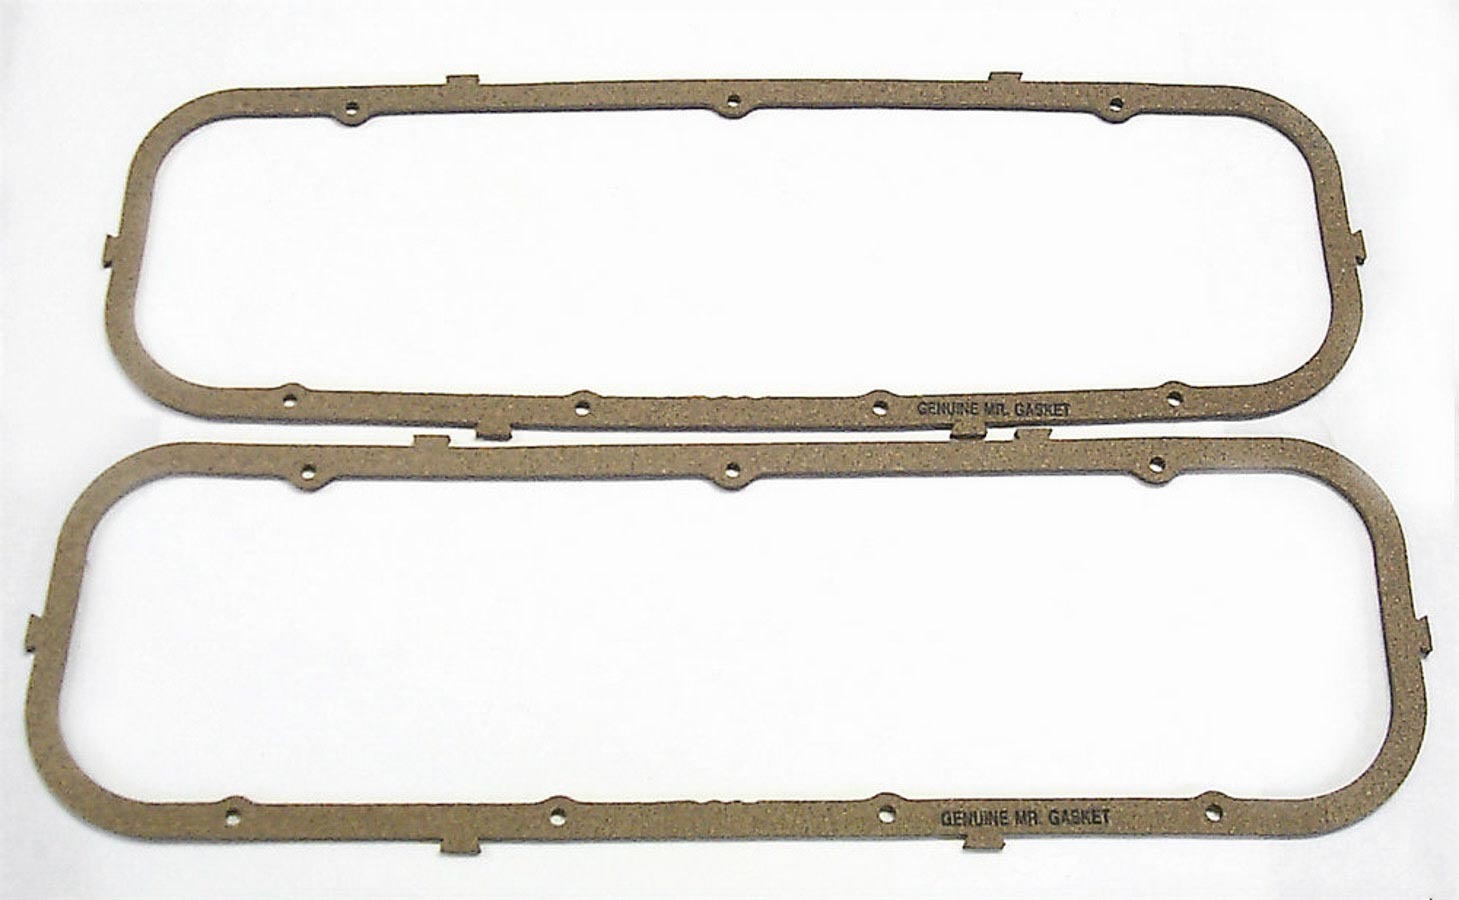 Mr. Gasket 177 Valve Cover Gasket, 0.187 in Thick, Cork / Rubber, Big Block Chevy, Pair